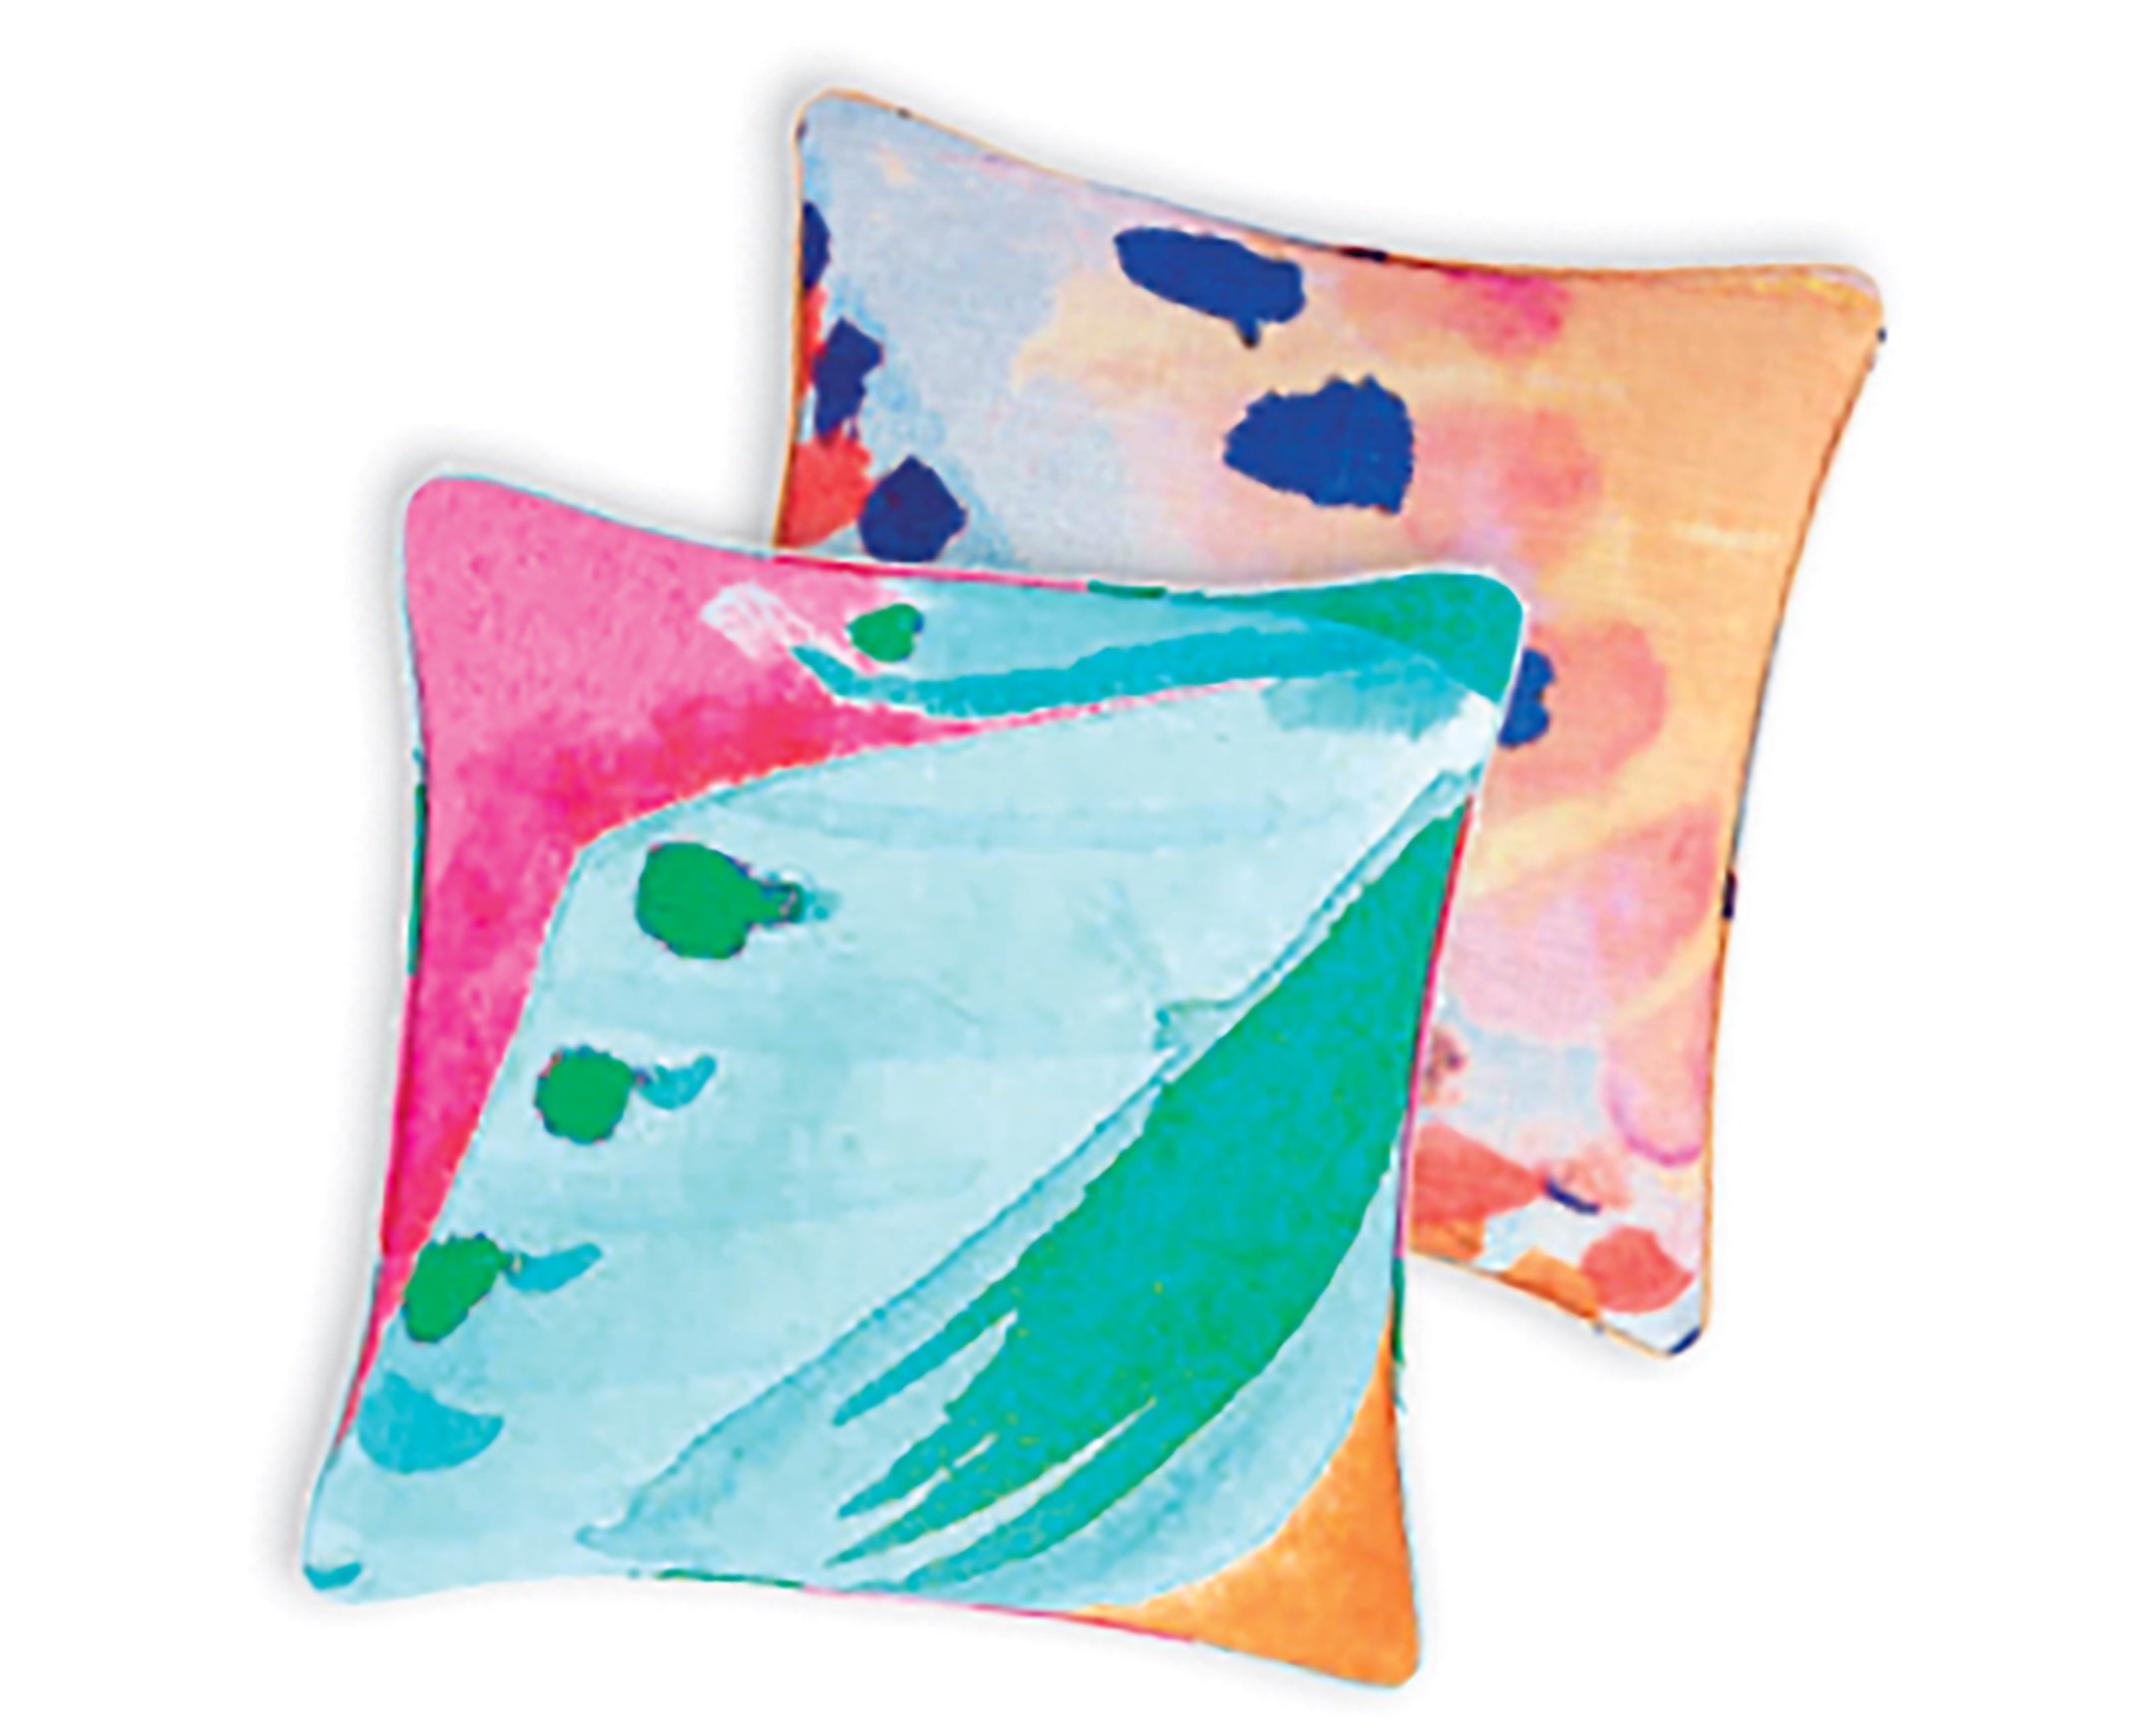  Load up your sofa or hammock with these stunning pillows, then let your daydreams fly free. Abstract watercolour fields of merging neon hues are strewn with dots and dashes that become fragments of nature’s kaleidoscope.  www.designstudiointeriors.s